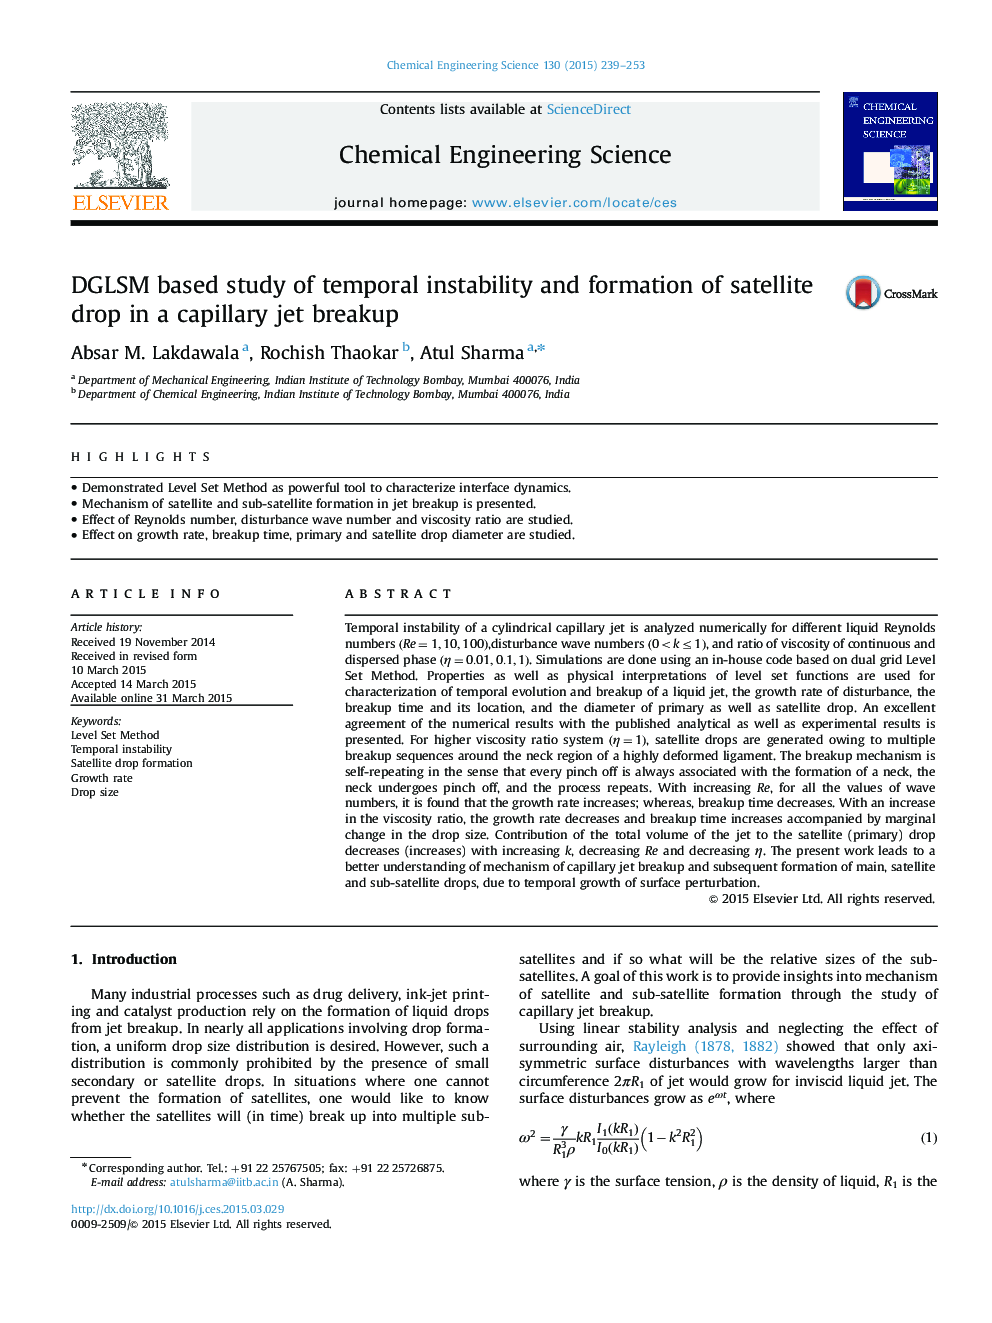 DGLSM based study of temporal instability and formation of satellite drop in a capillary jet breakup